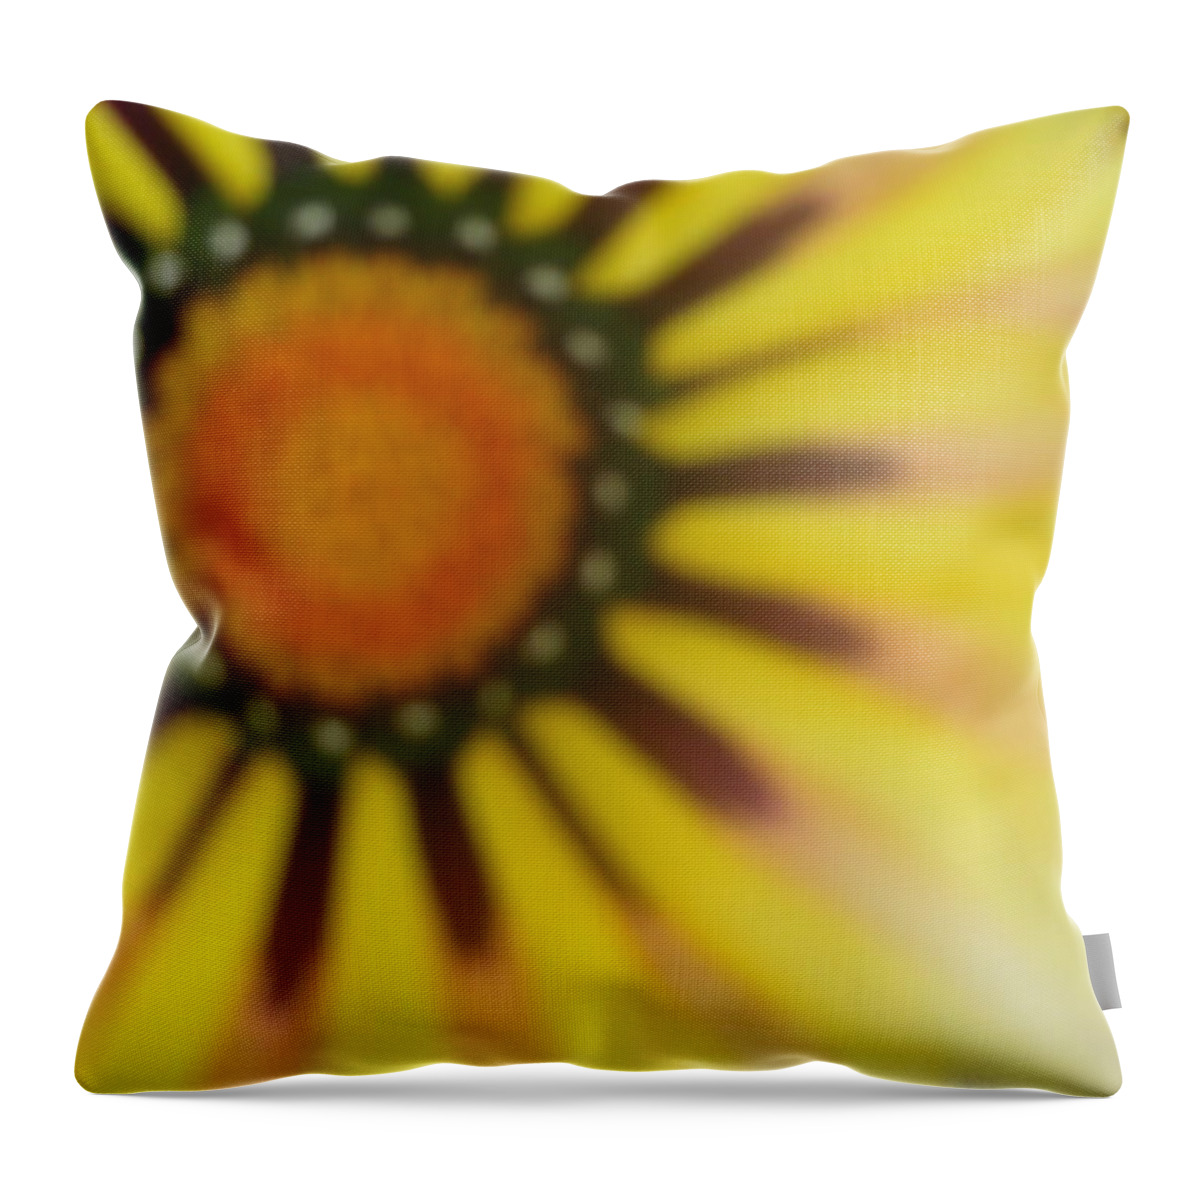 Flower Throw Pillow featuring the photograph Flower Gazing At You by Anamarija Marinovic